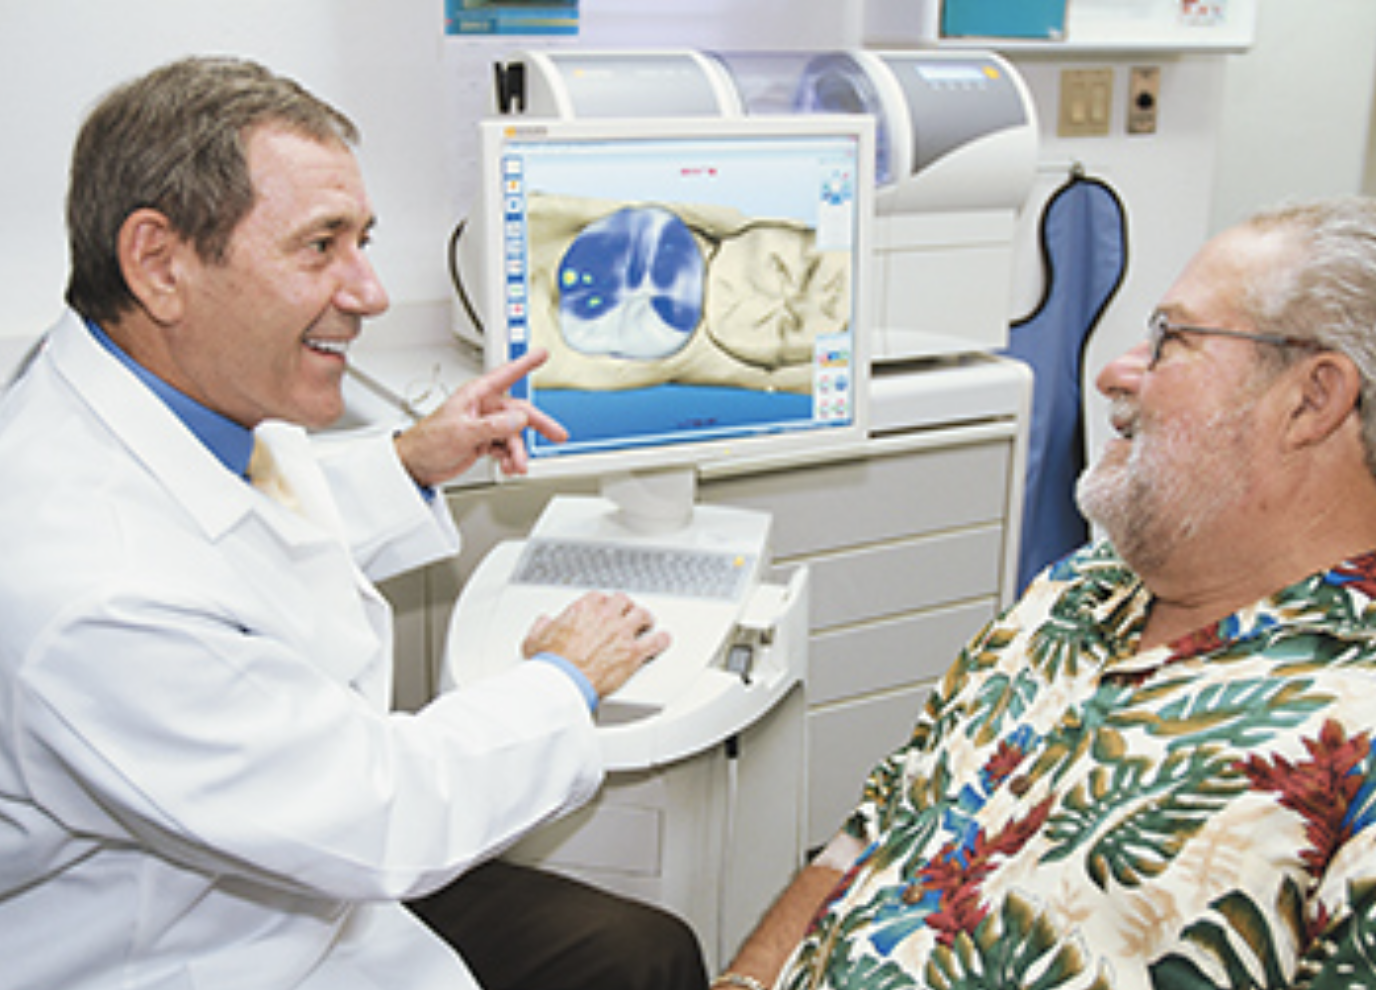 Dr. Spalenka uses a CT scan